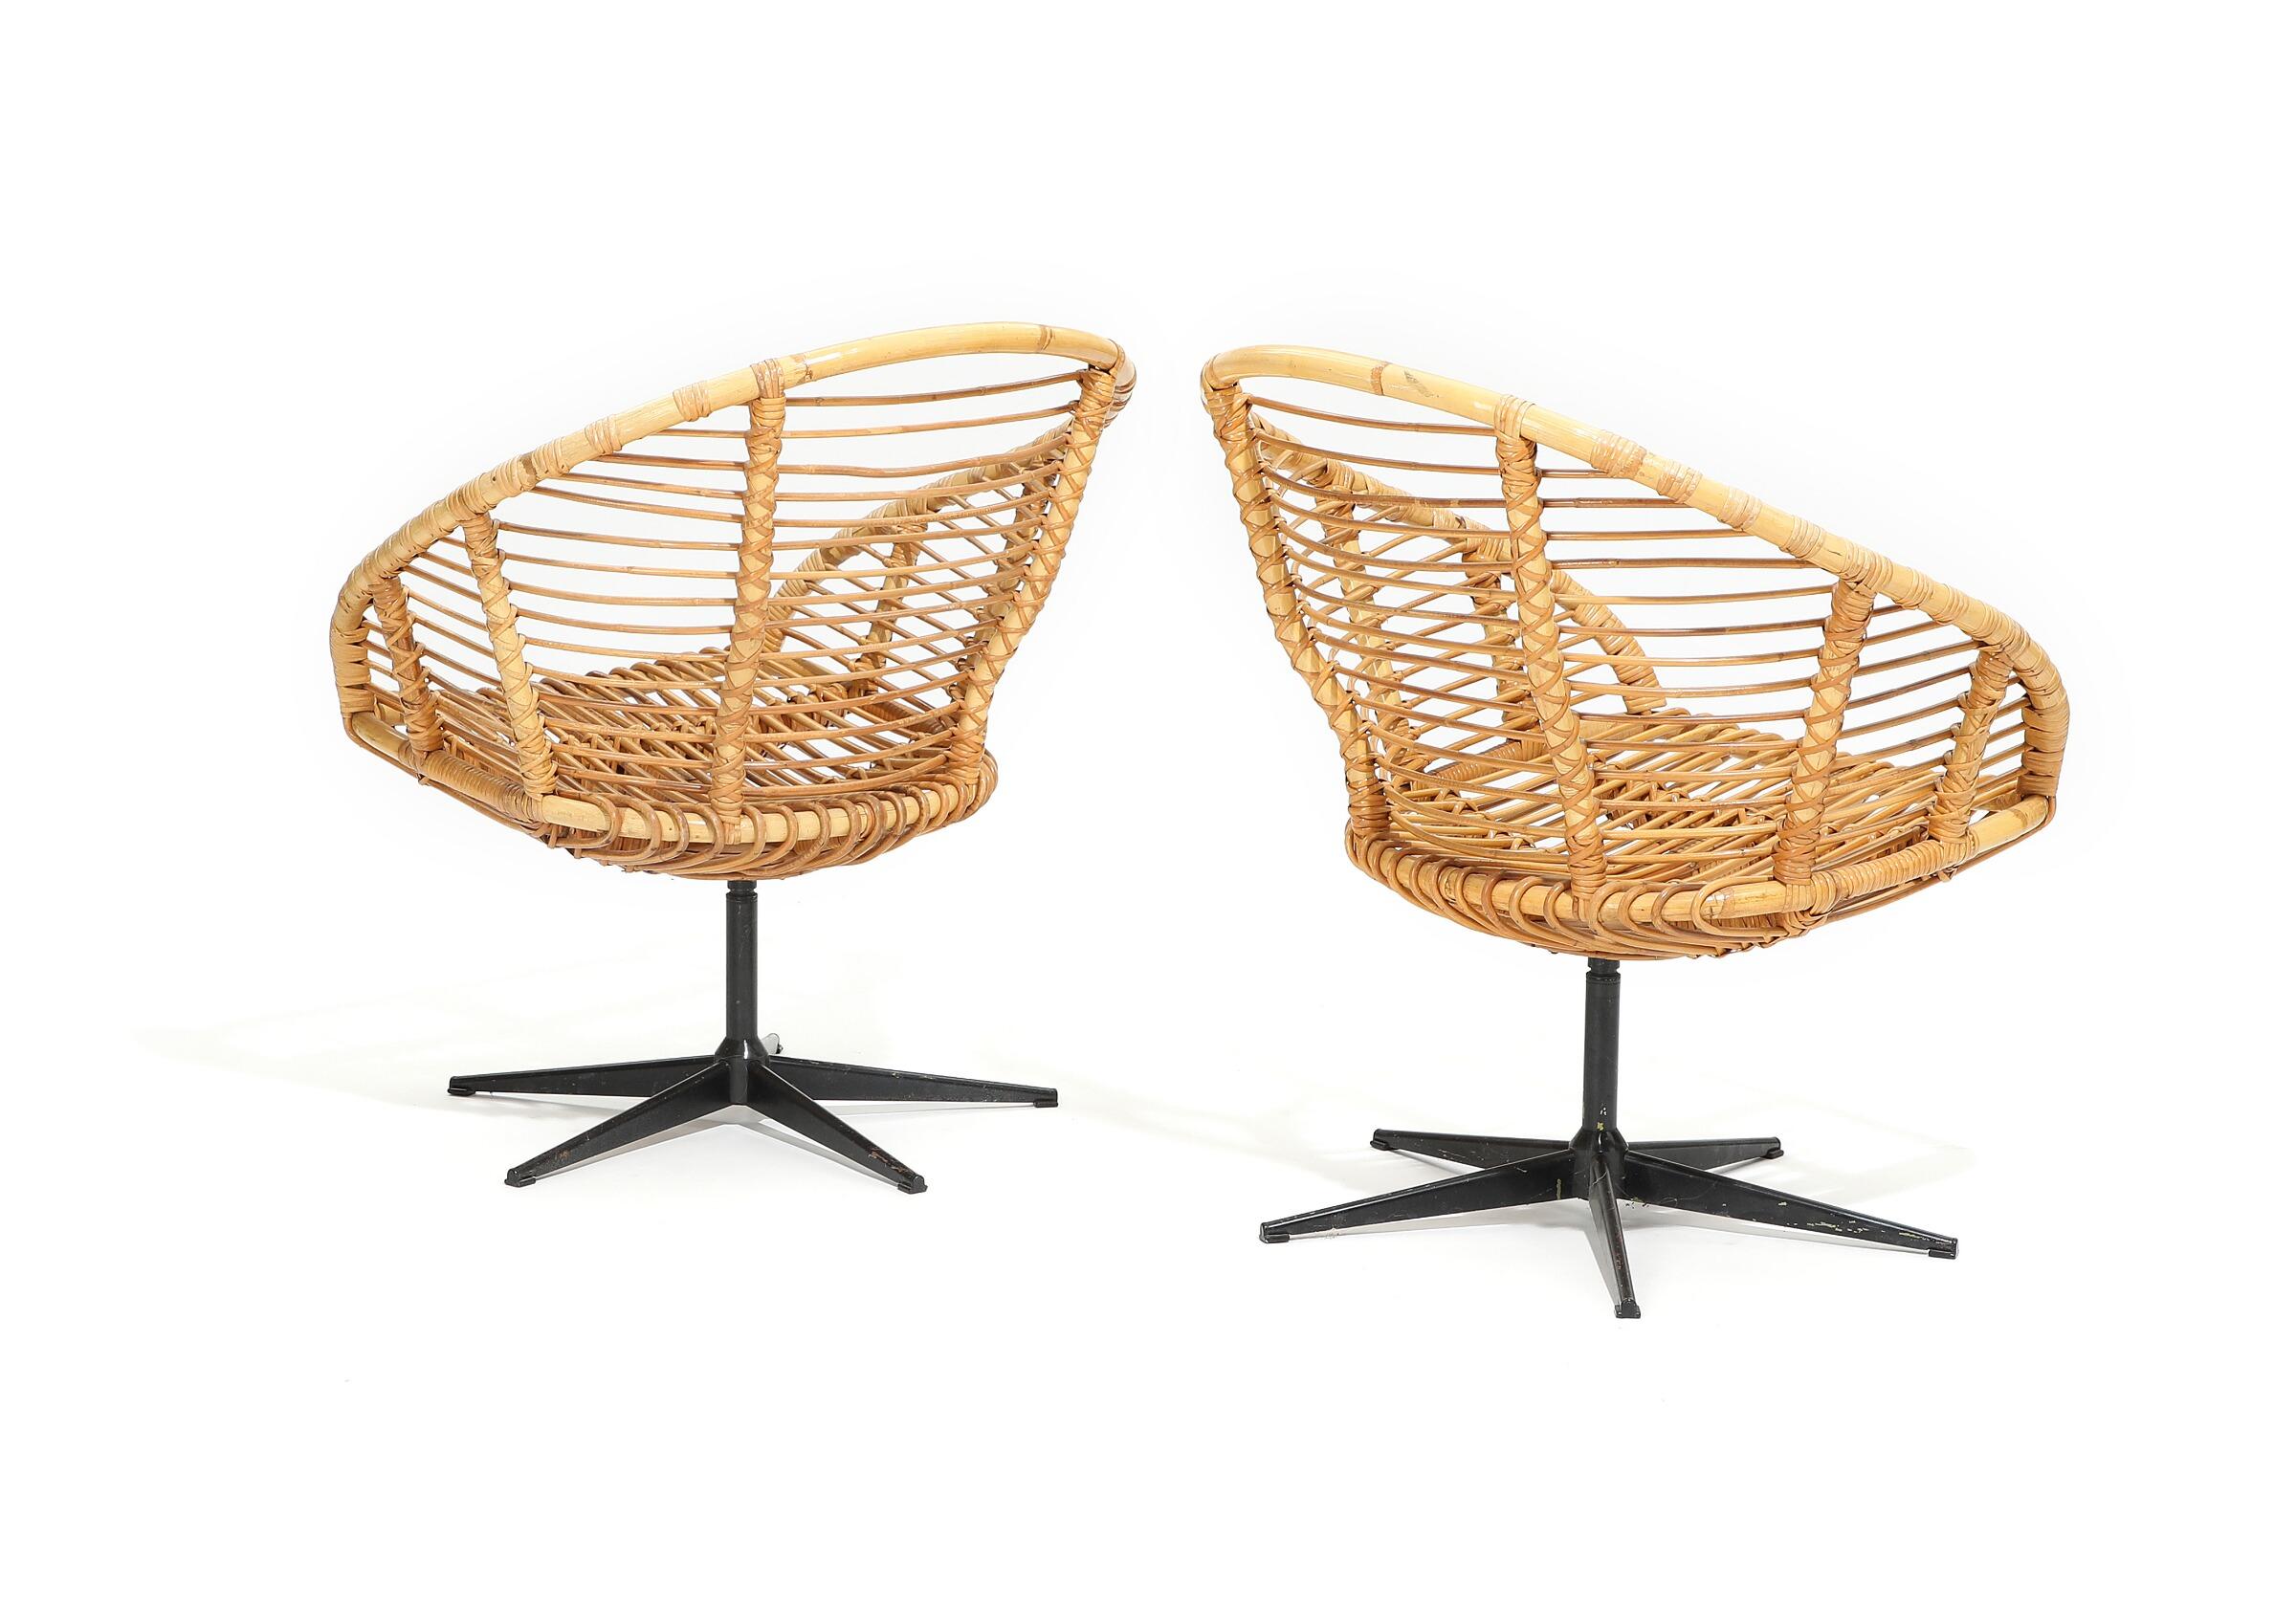 A pair of Danish rattan and bamboo swivel chairs and coffee table with glass top and black lacquered metal frame. Measures: Chairs 30